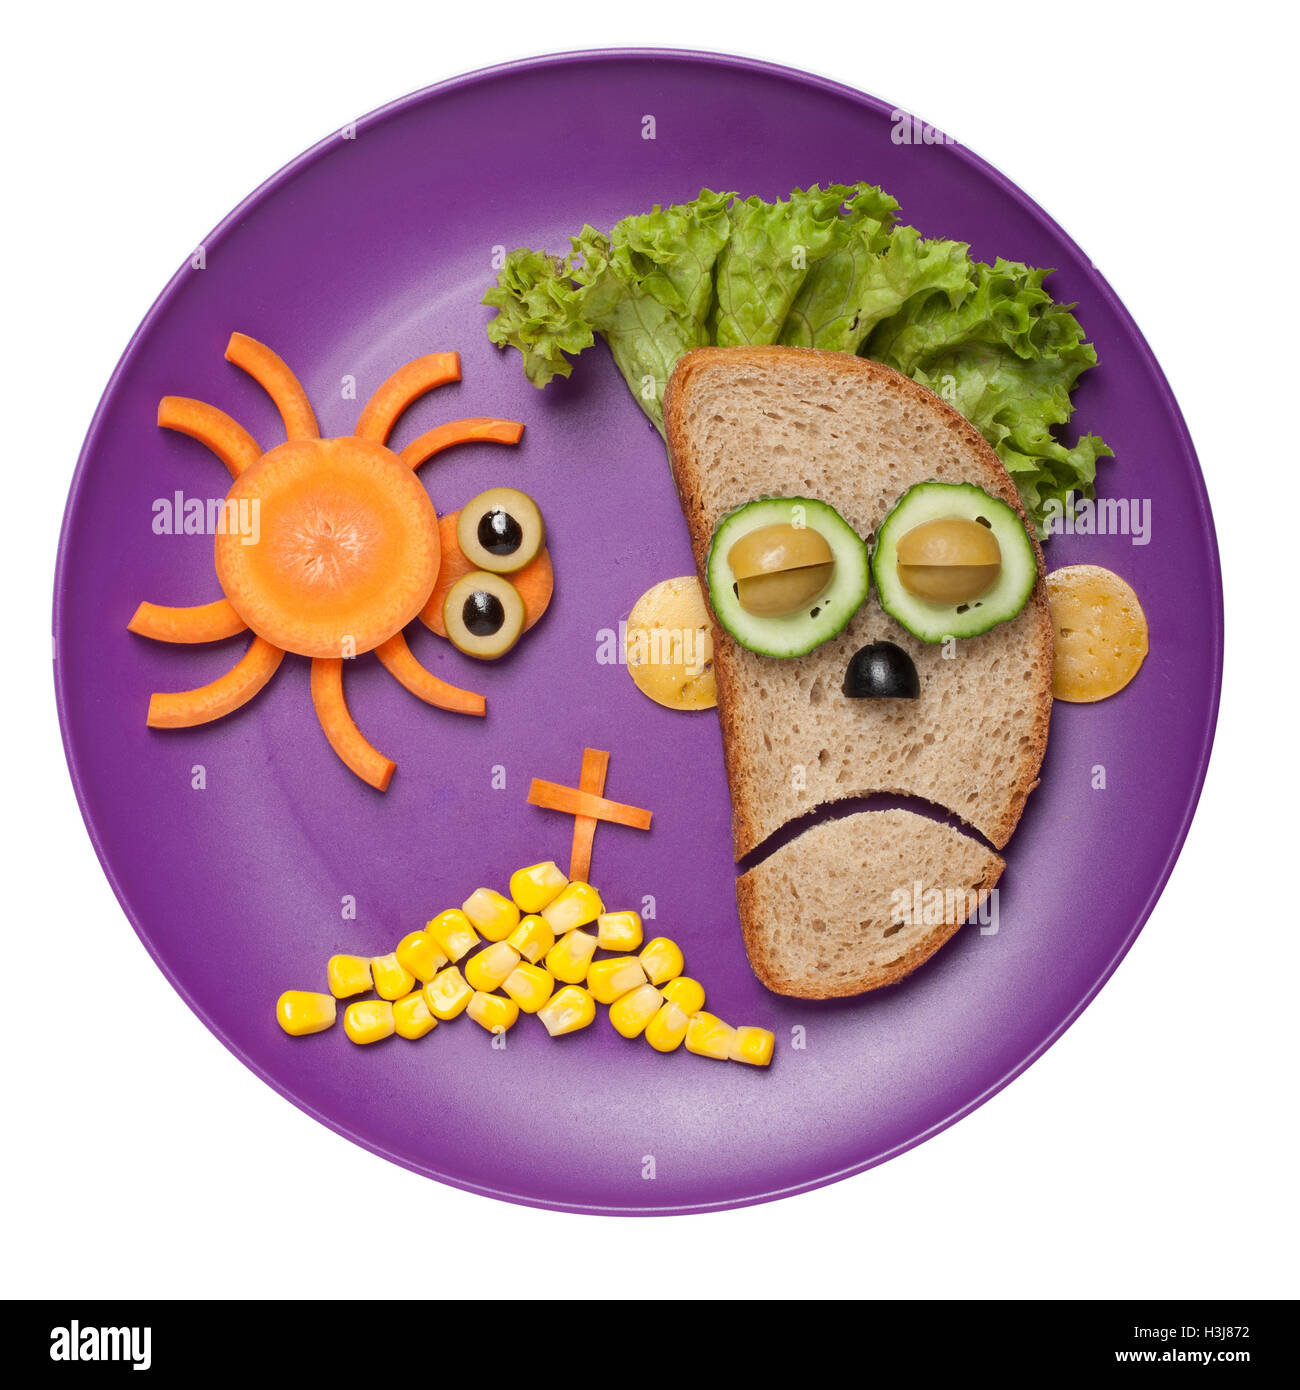 Halloween zombie and spider made of bread vegetables on plate Stock Photo